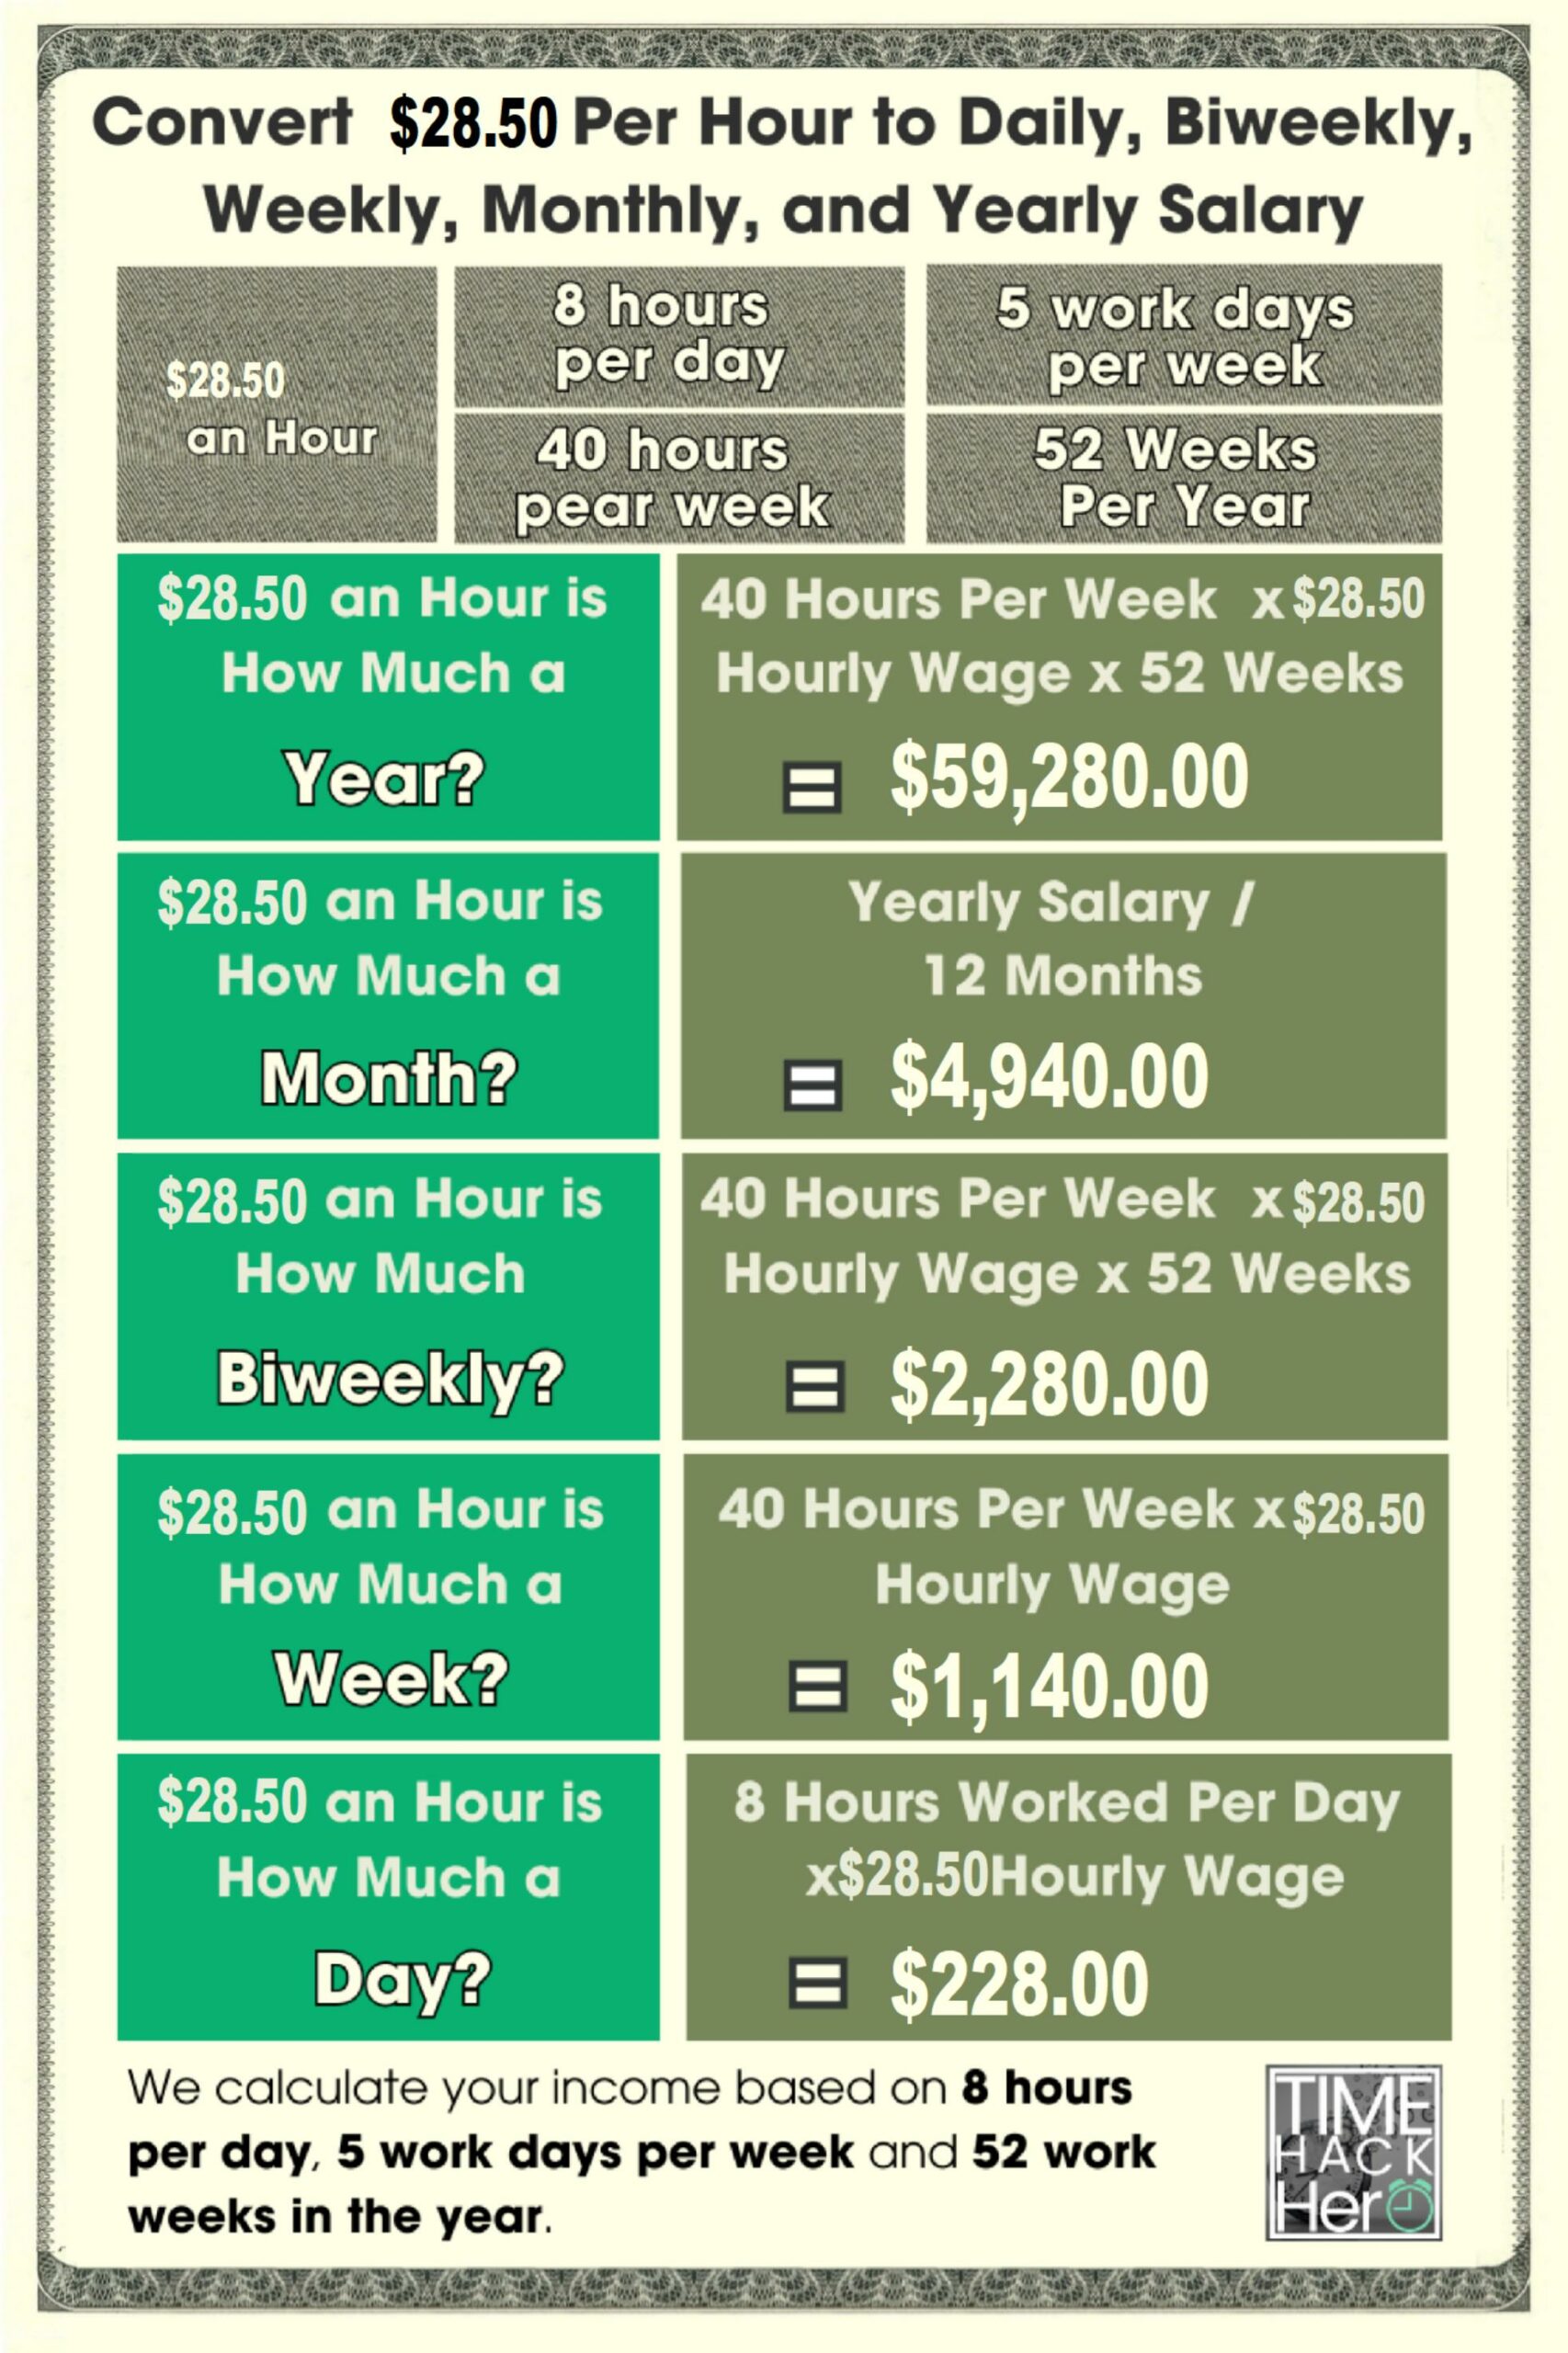 Convert $28.50 Per Hour to Weekly, Monthly, and Yearly Salary